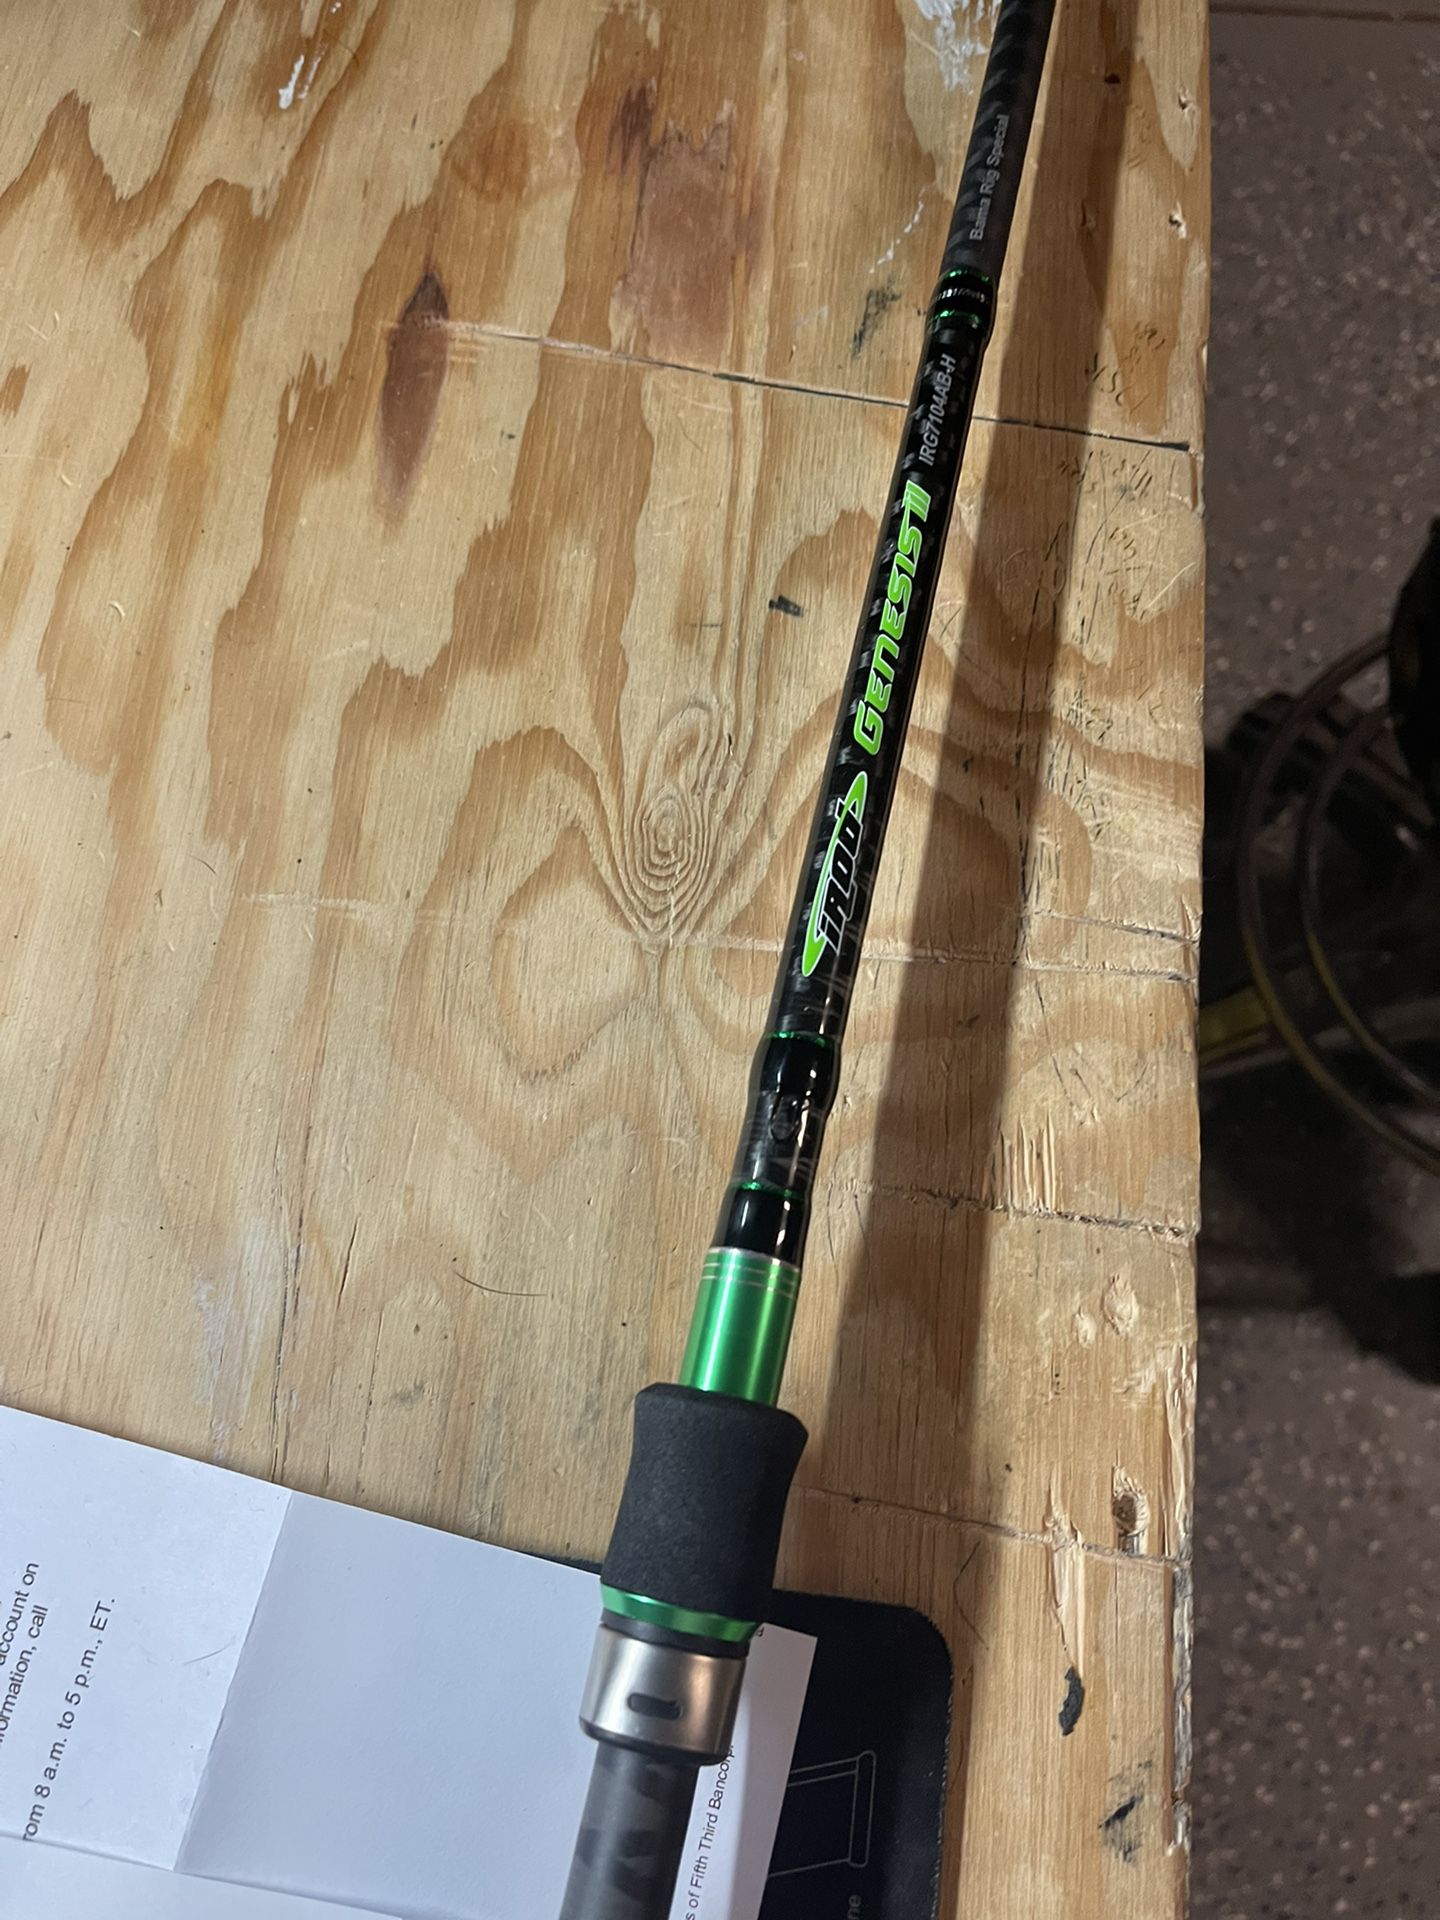 Irod Genesis 3 Bama Rig Fishing Rod for Sale in Beaumont, CA - OfferUp